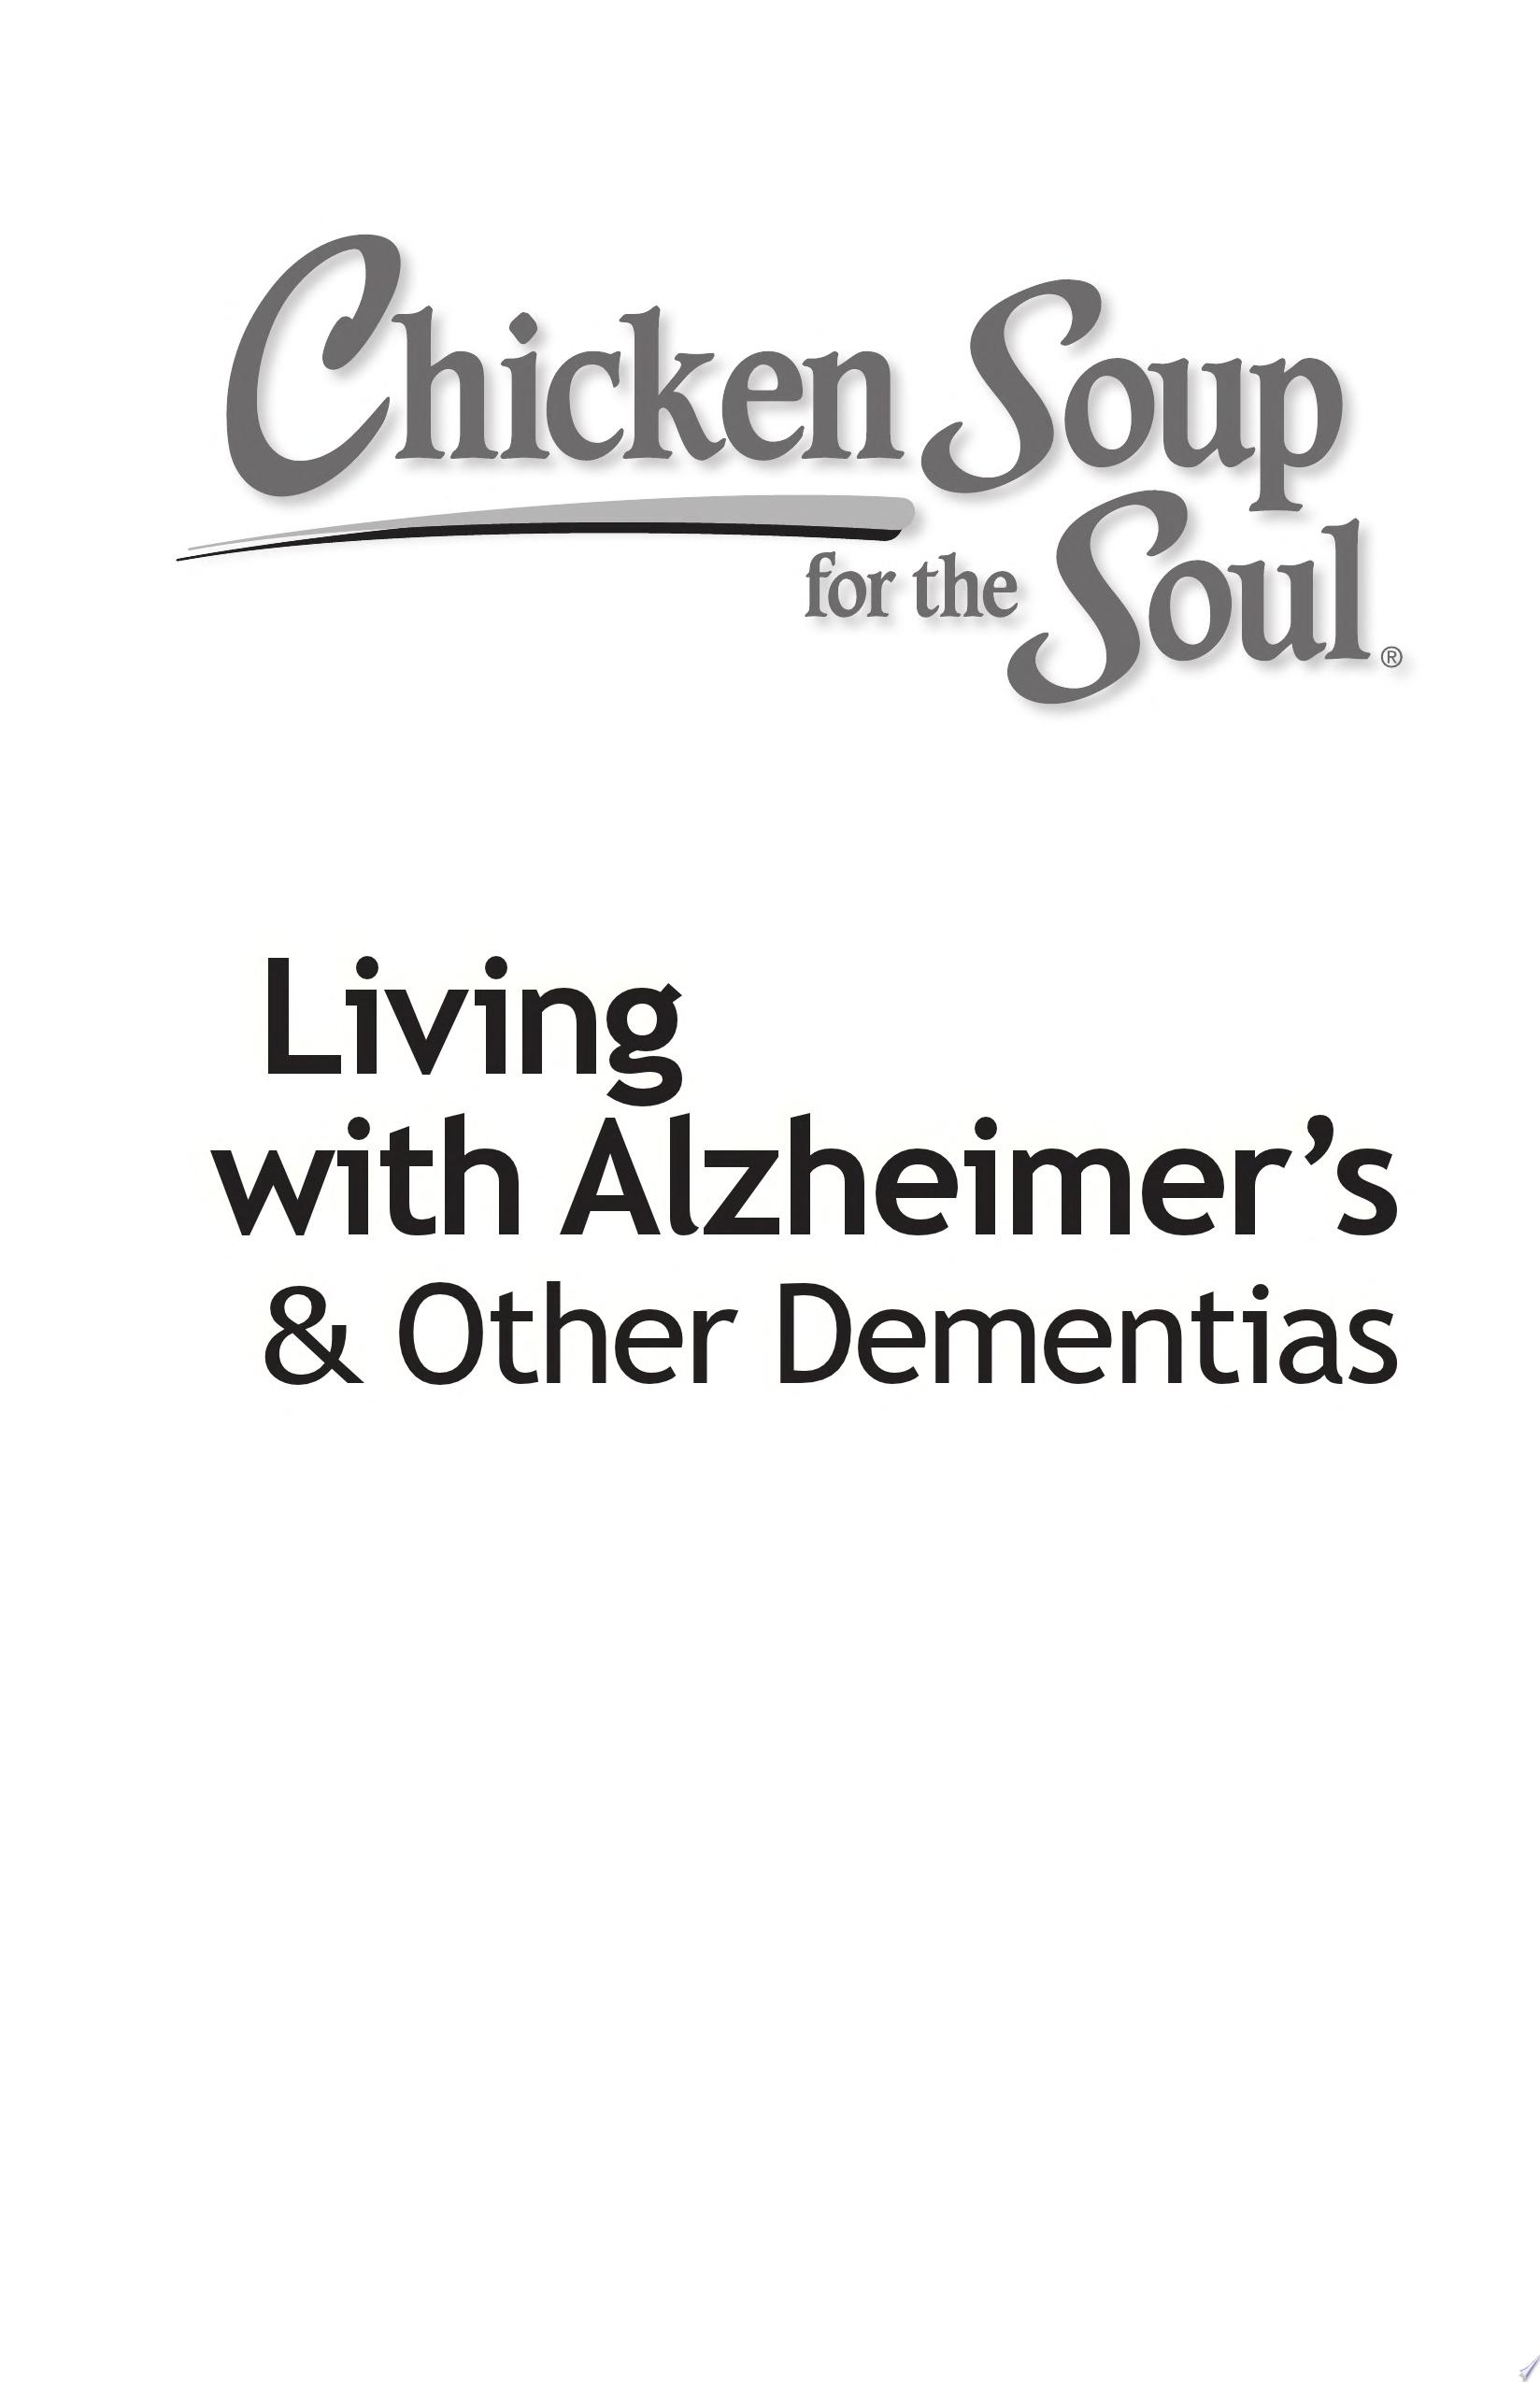 Image for "Chicken Soup for the Soul: Living with Alzheimerâs &amp; Other Dementias"